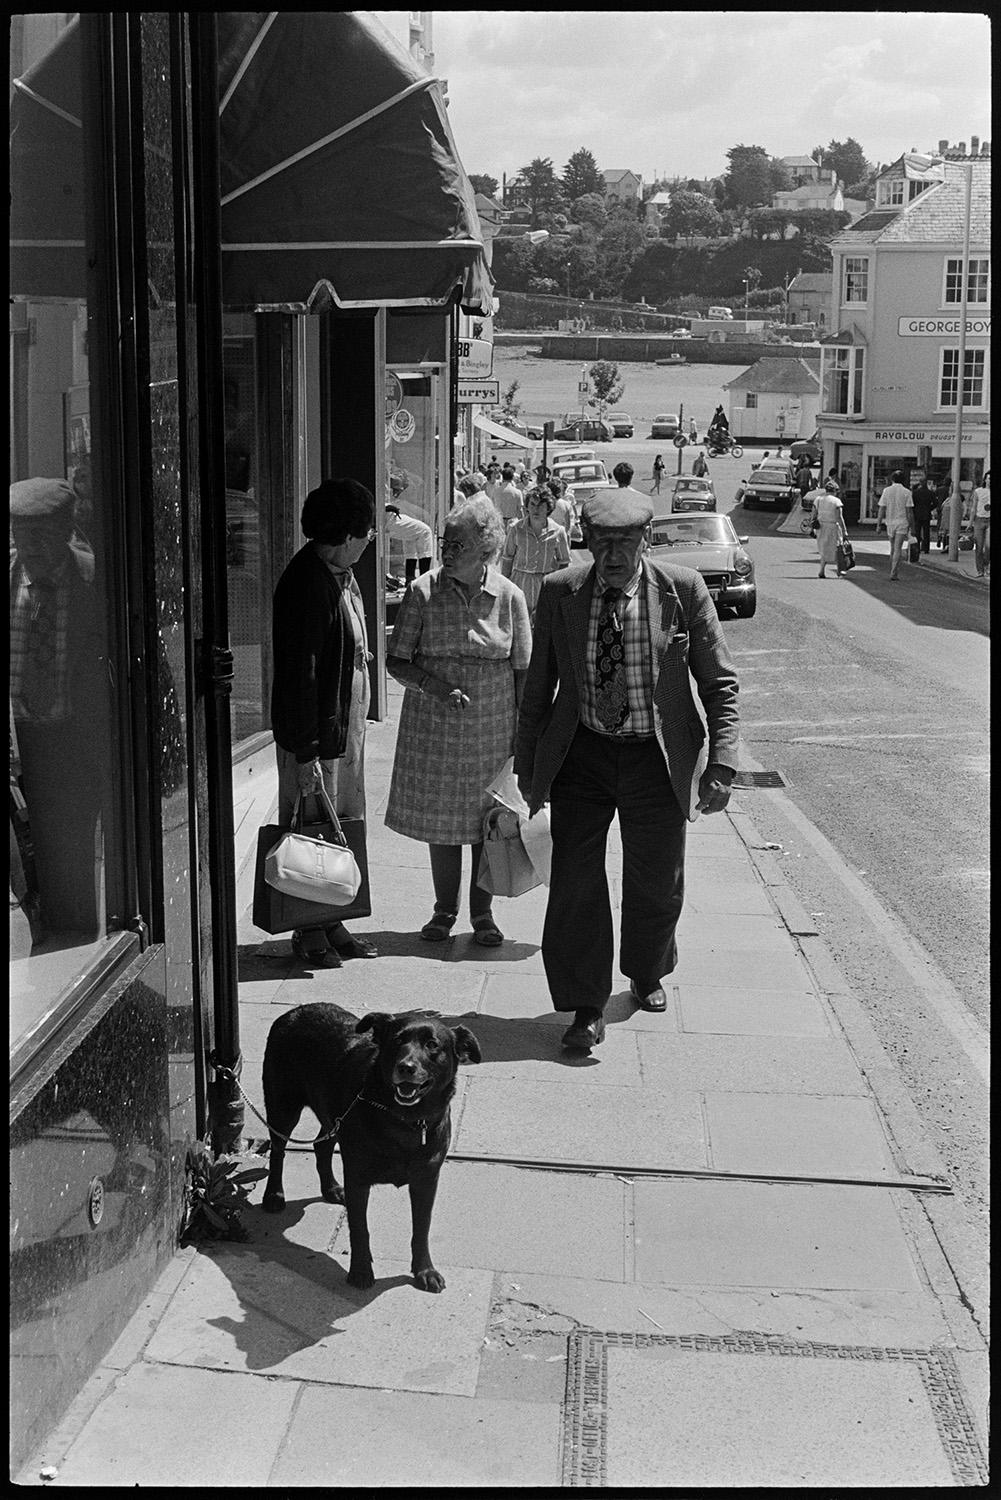 Street scenes with shoppers and passers by. 
[Men and women chatting and walking along Bideford High Street past shop fronts. A dog is tethered to a drainpipe outside one of the shops with an awning.]